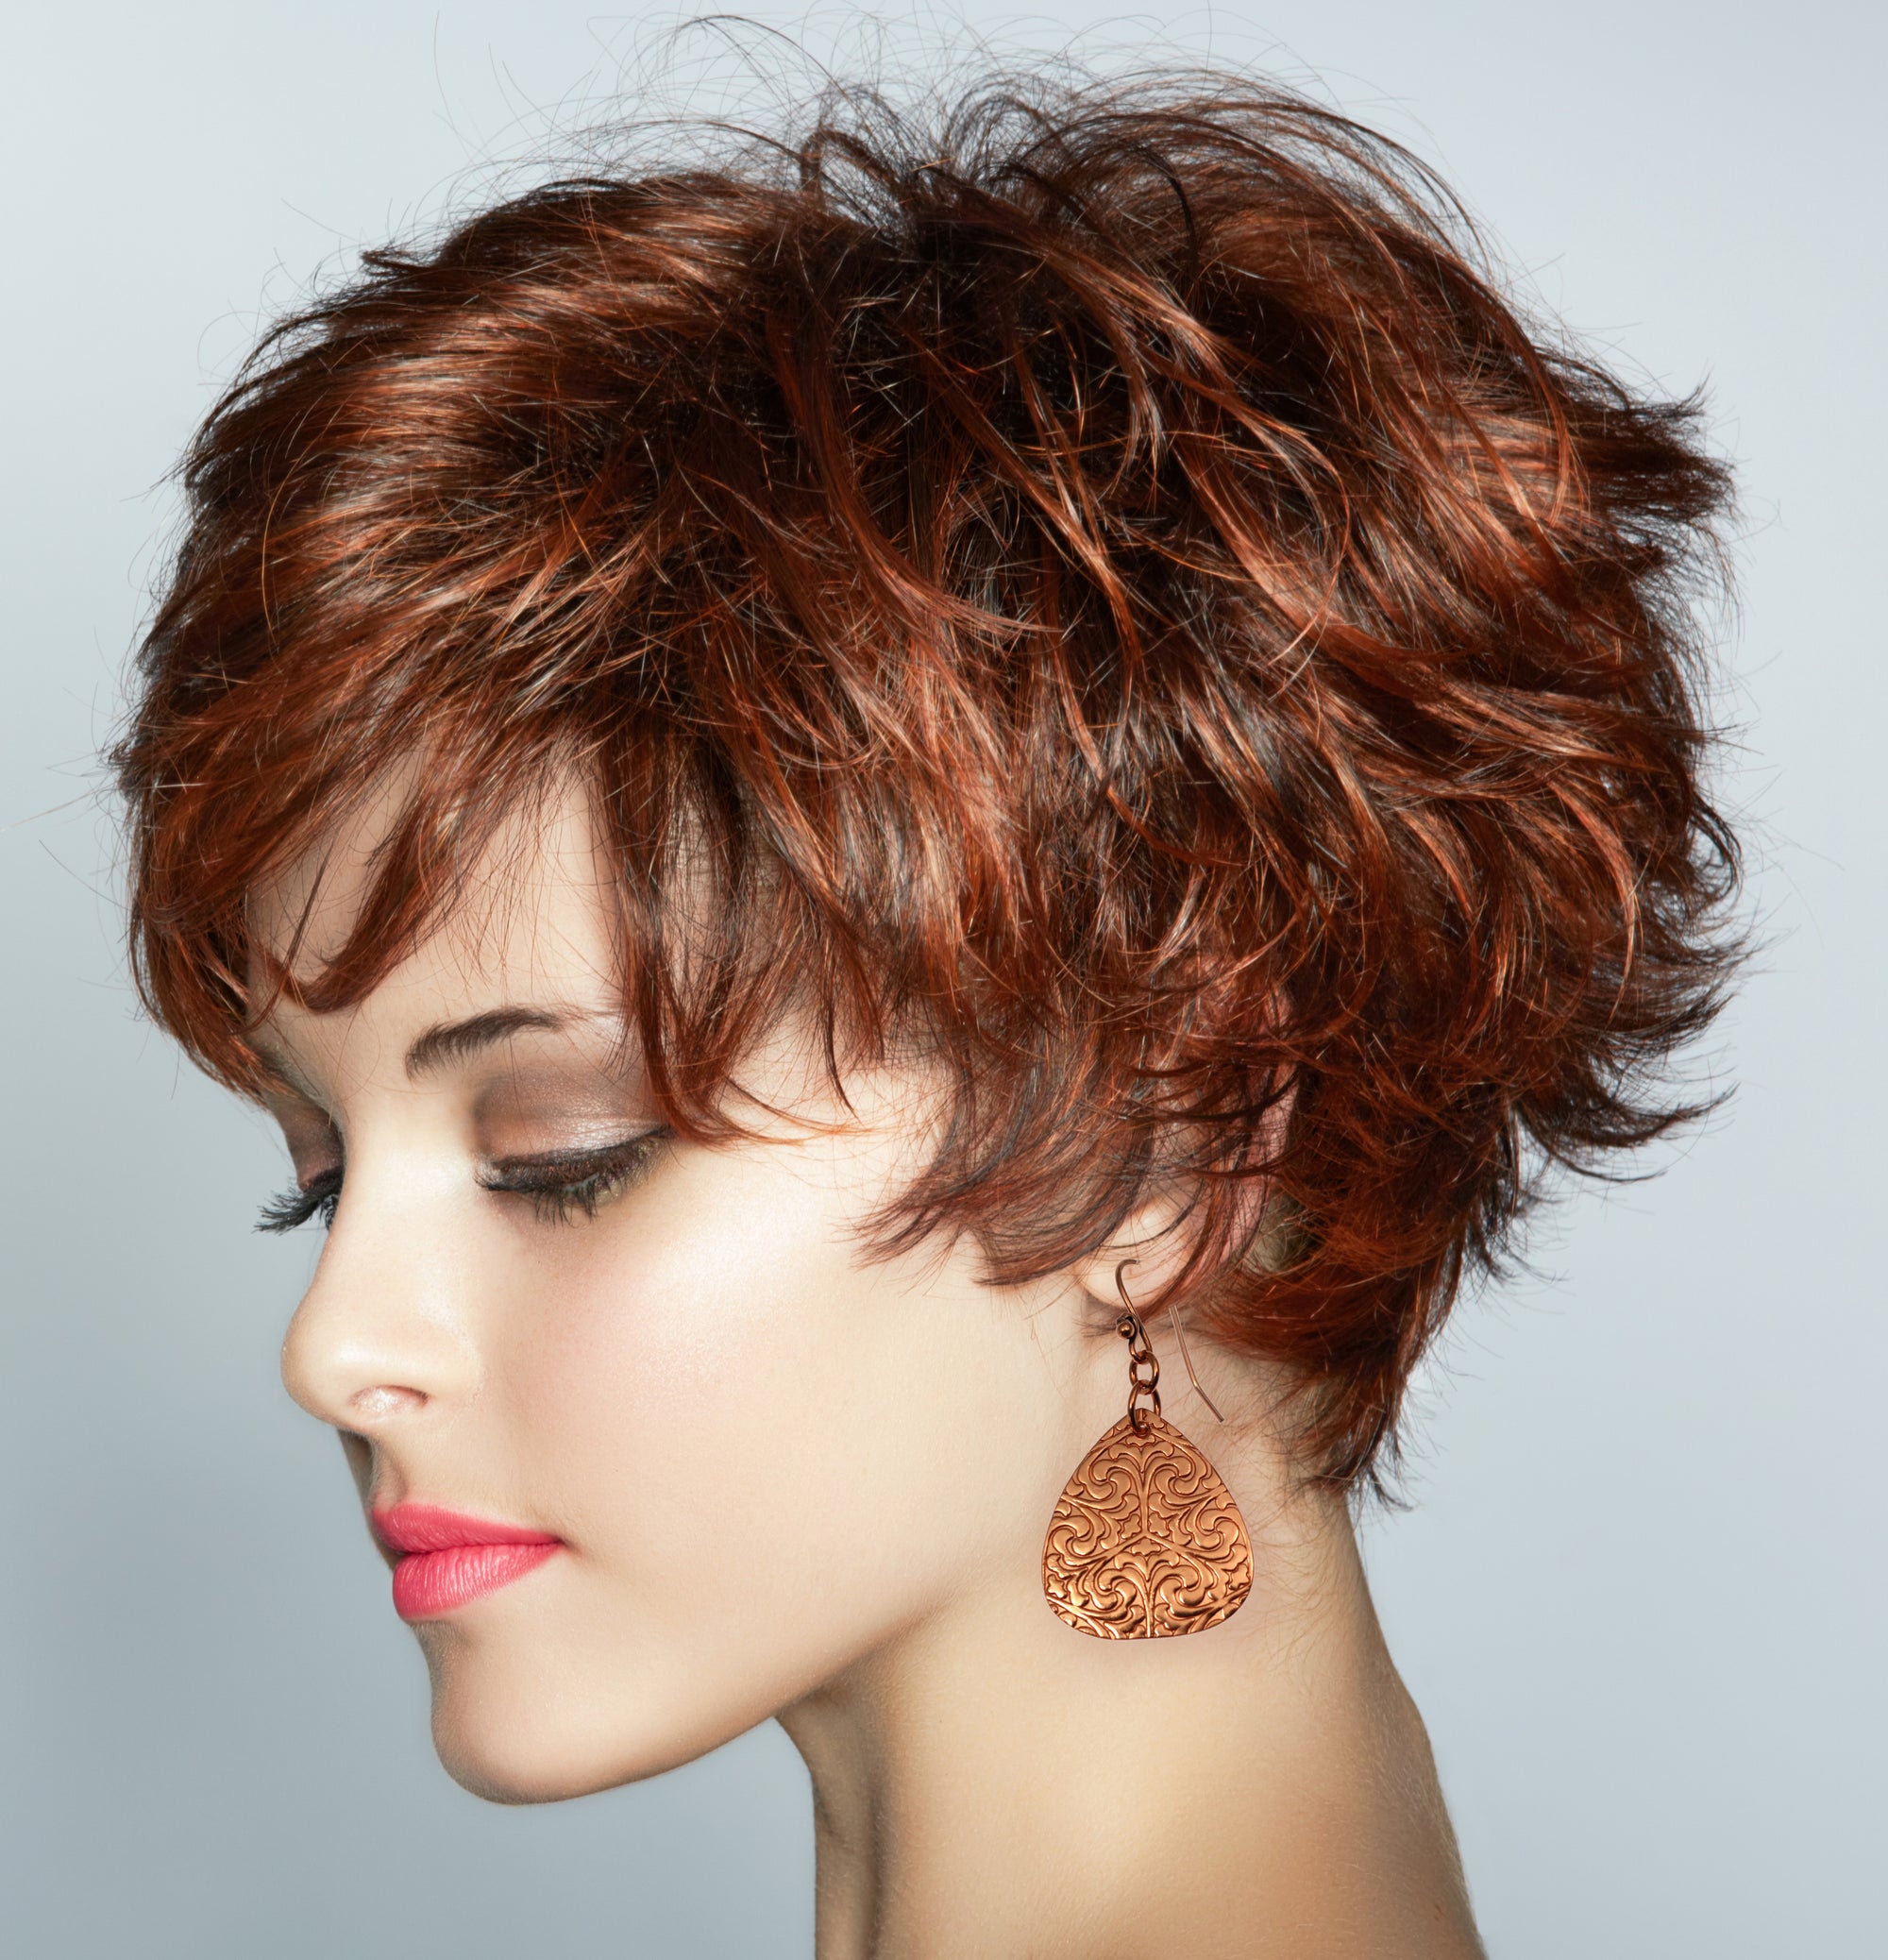 Jewelry Gift Ideas by Hair Color